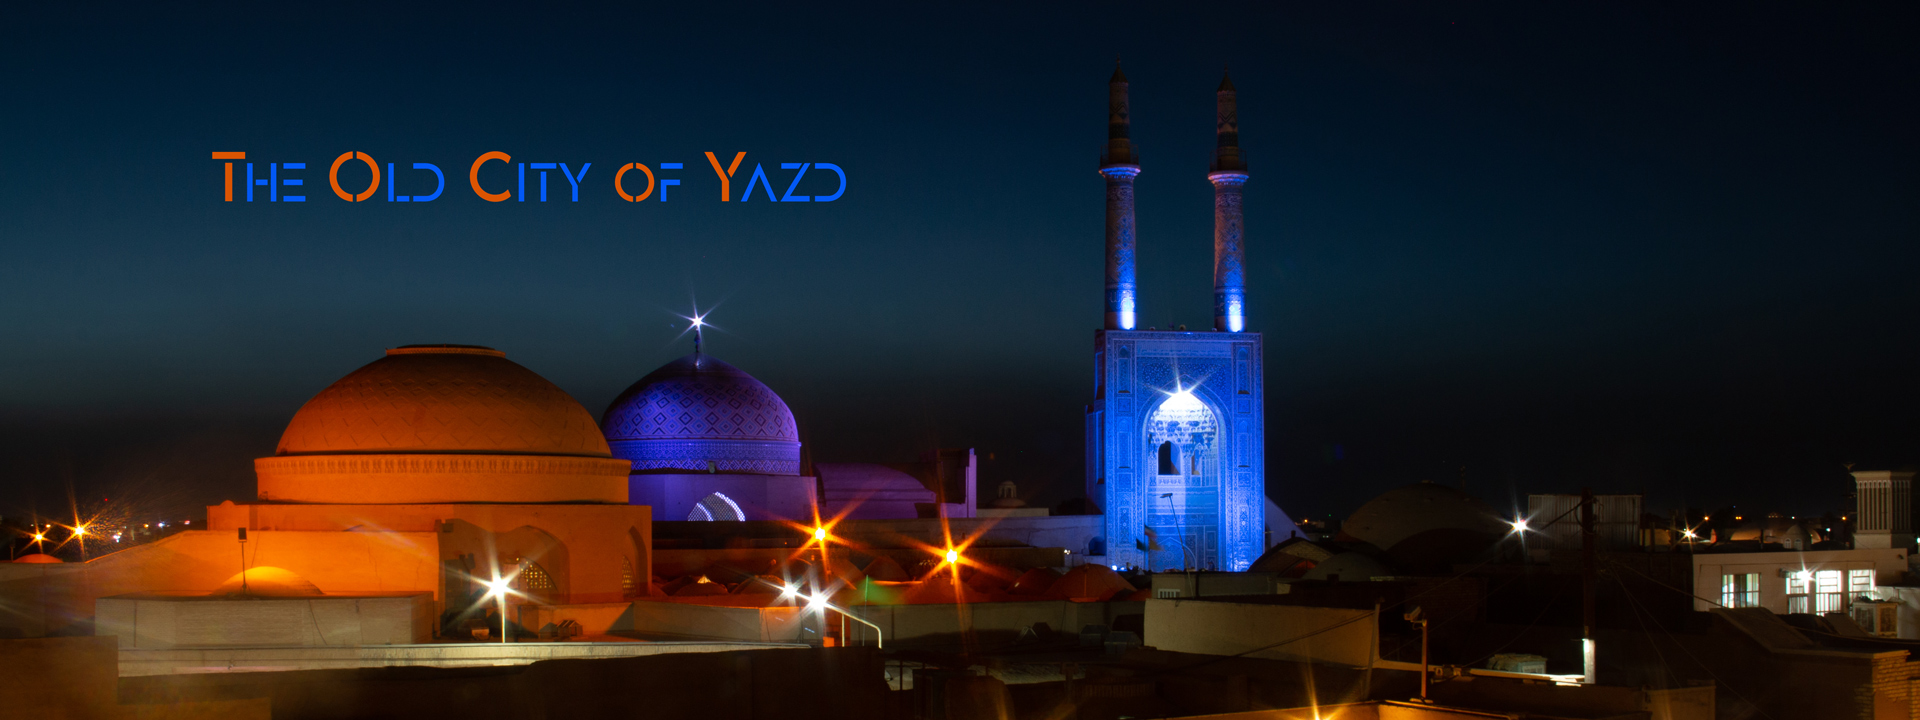 View of the old city of Yazd at night